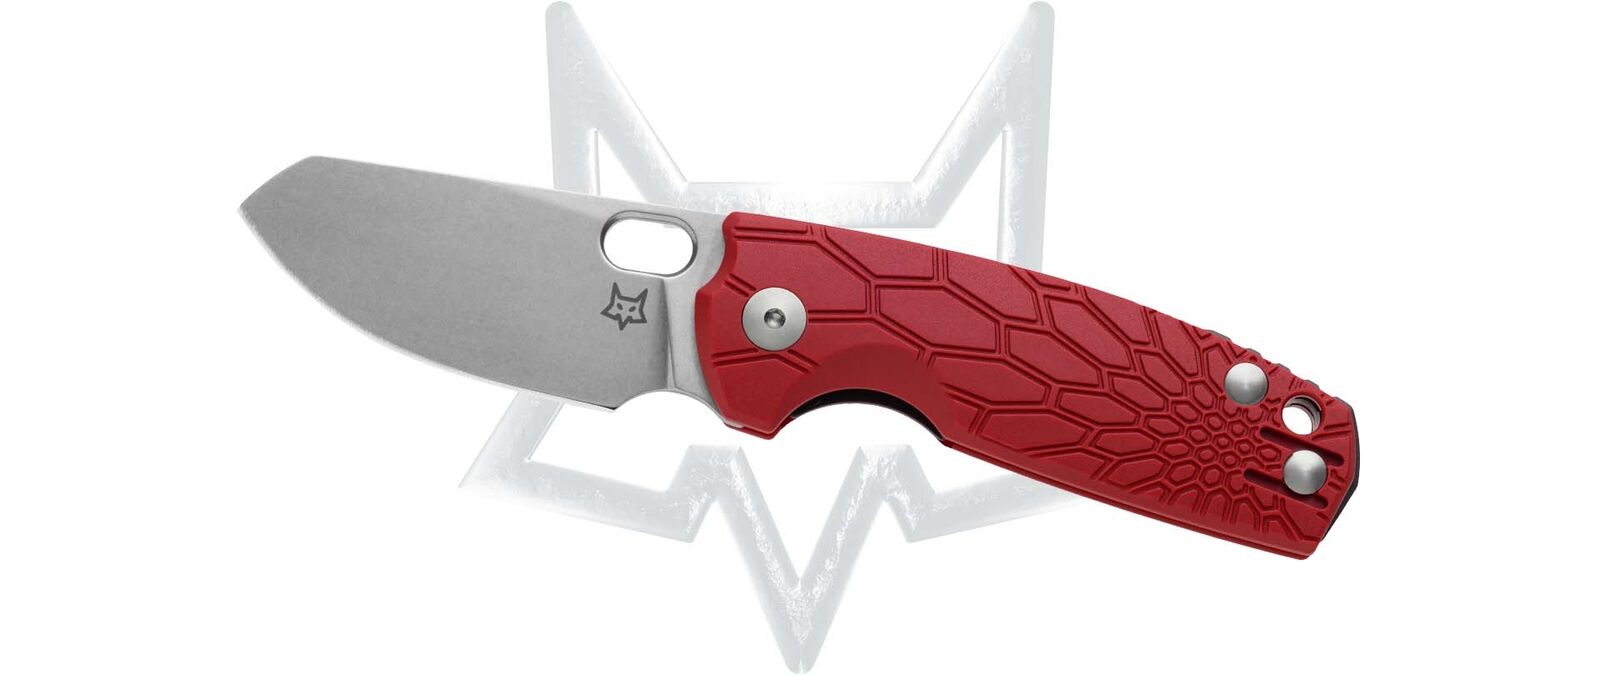 Fox Knives Baby Core Slip-joint FX-608 UK R N690Co Stainless Red FRN